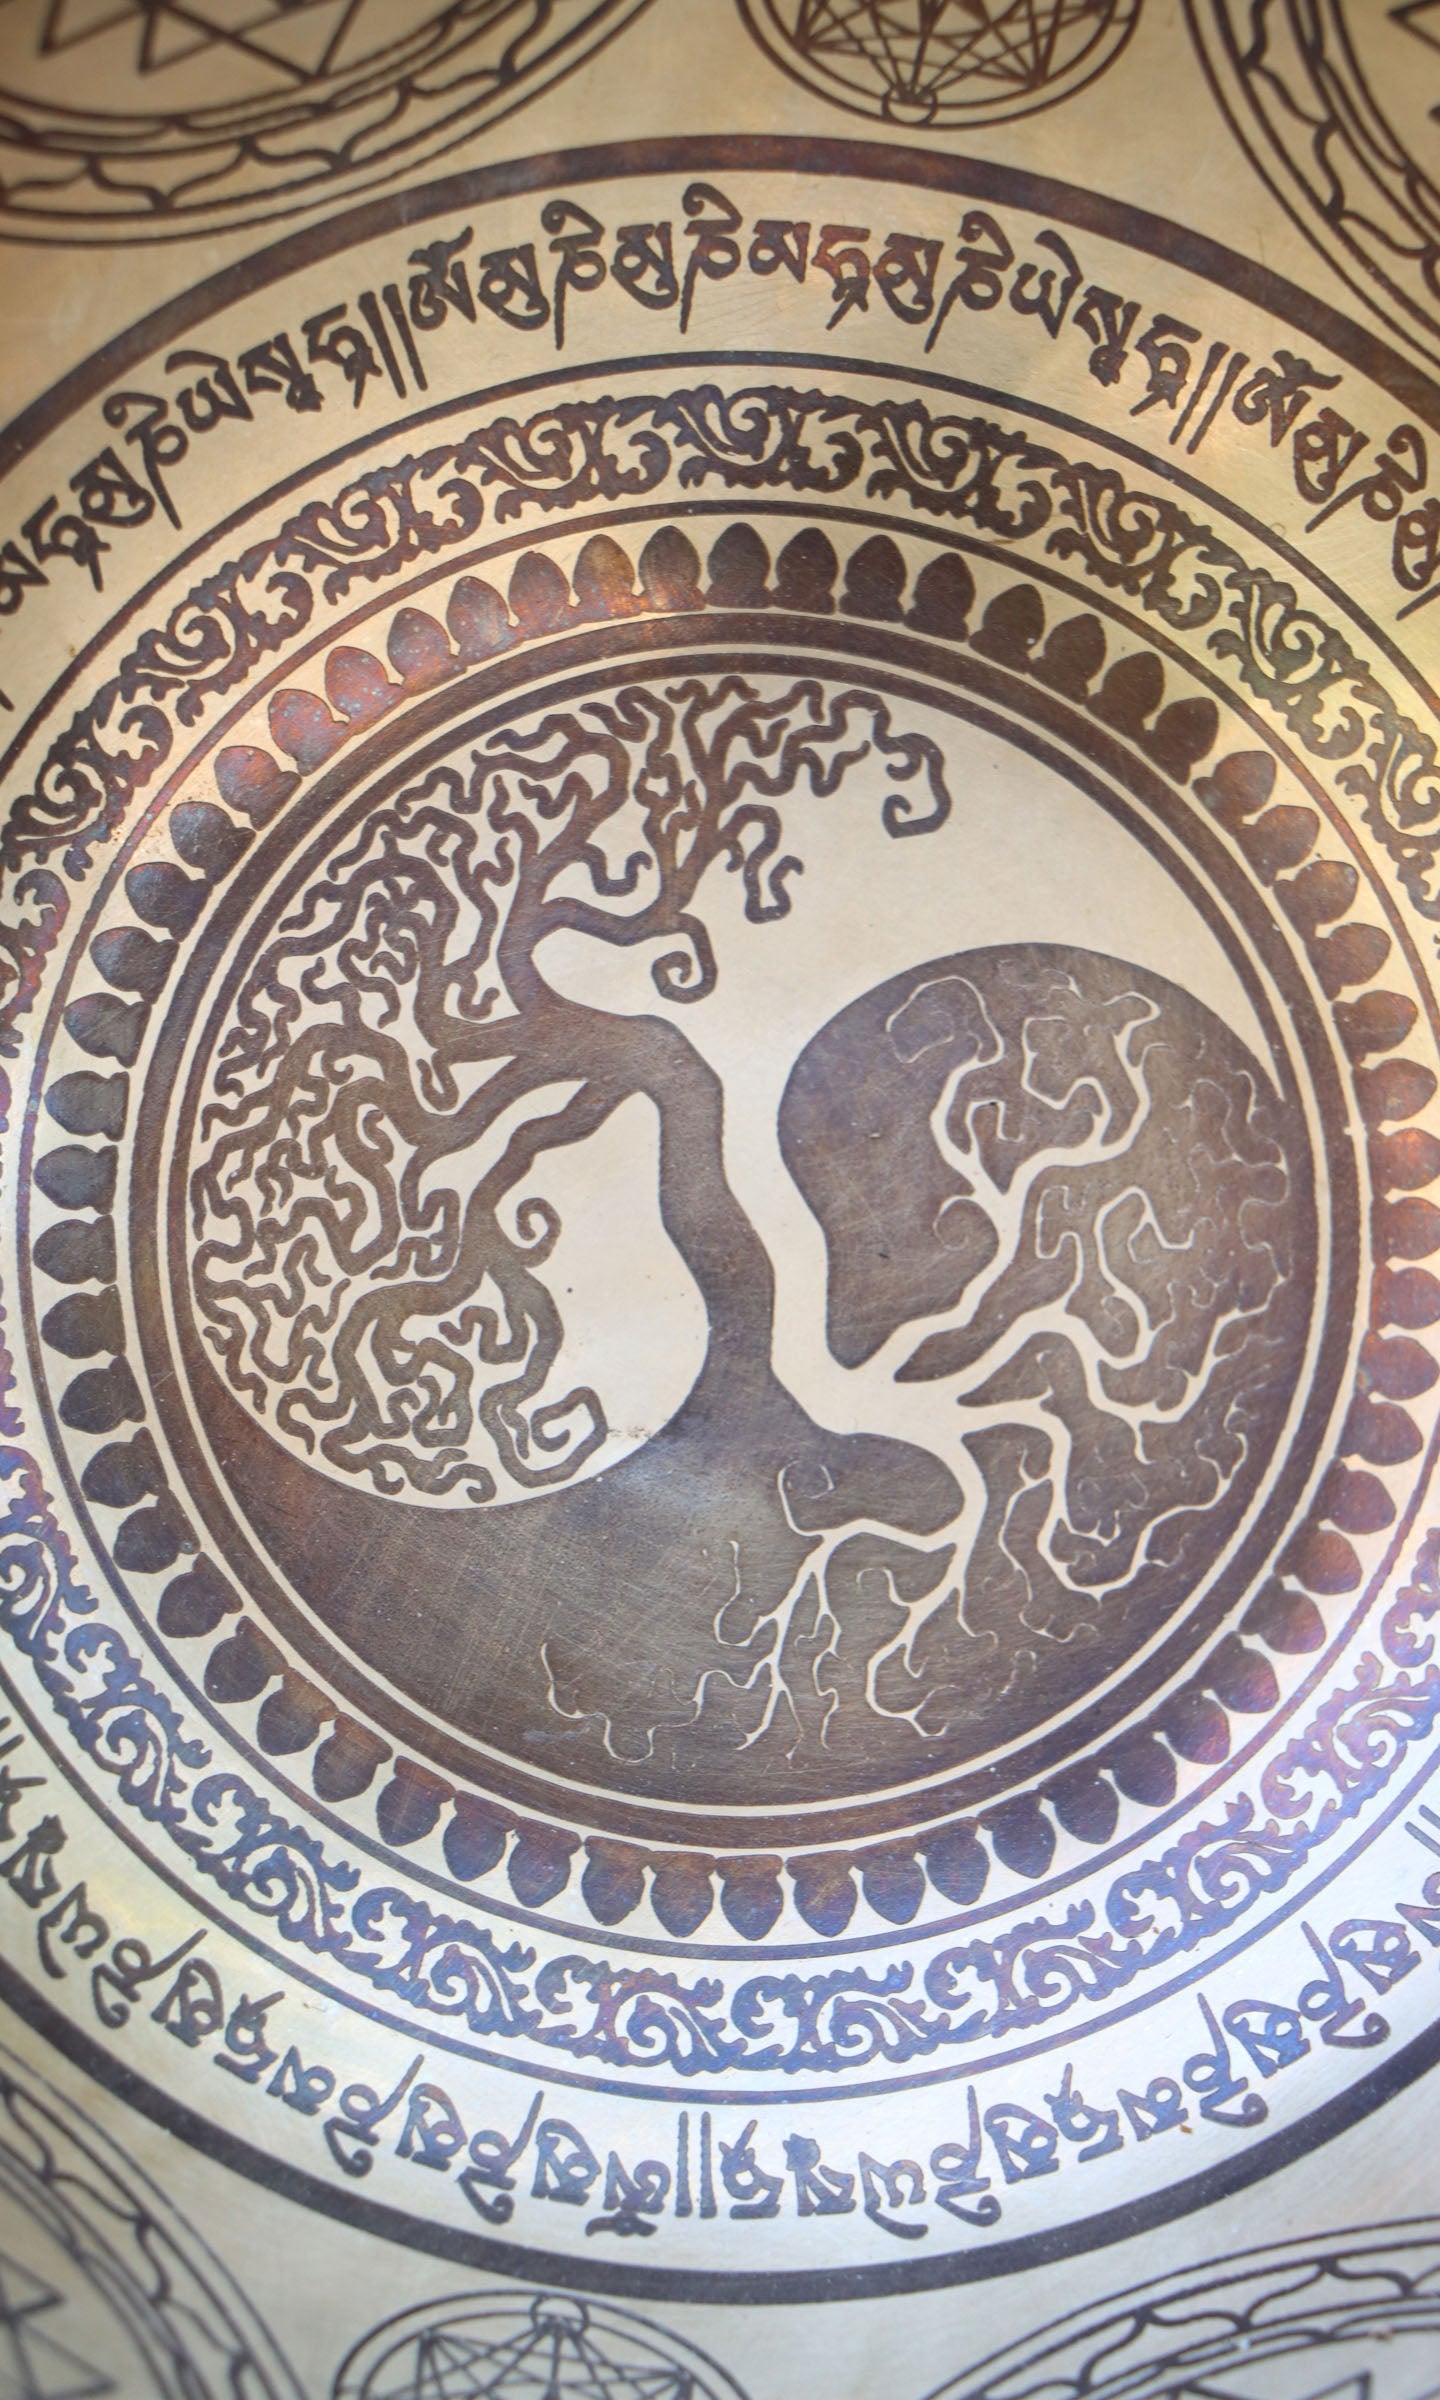 Tree of life singisng bowsl for for relaxation, healing, and enlightenment.